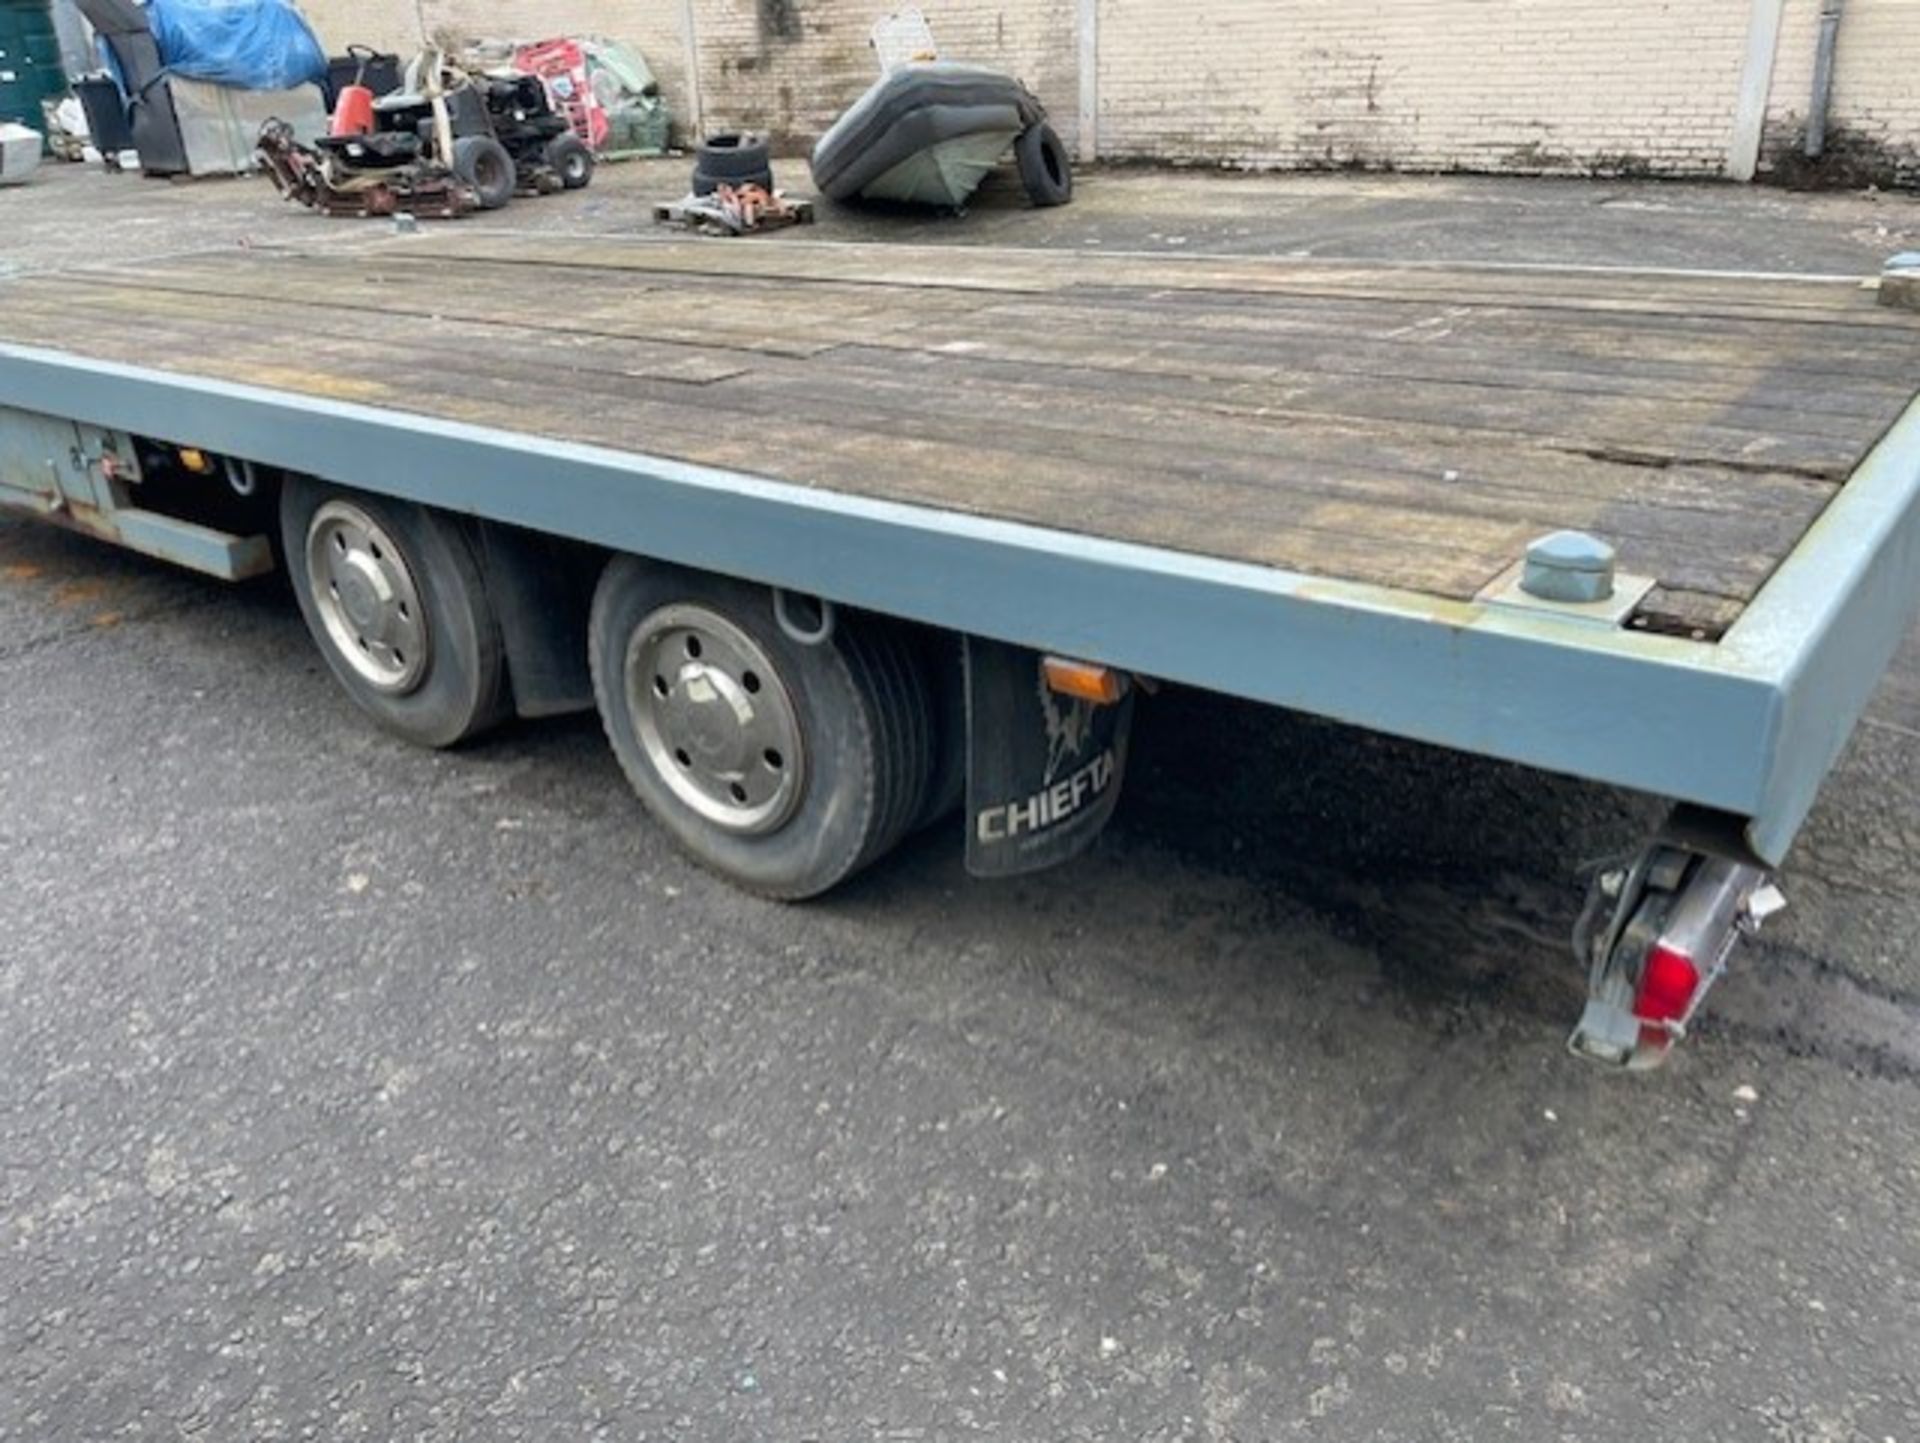 Trailer draw bar from lorry in ok condition will require some work but pulls along ok been stood 6